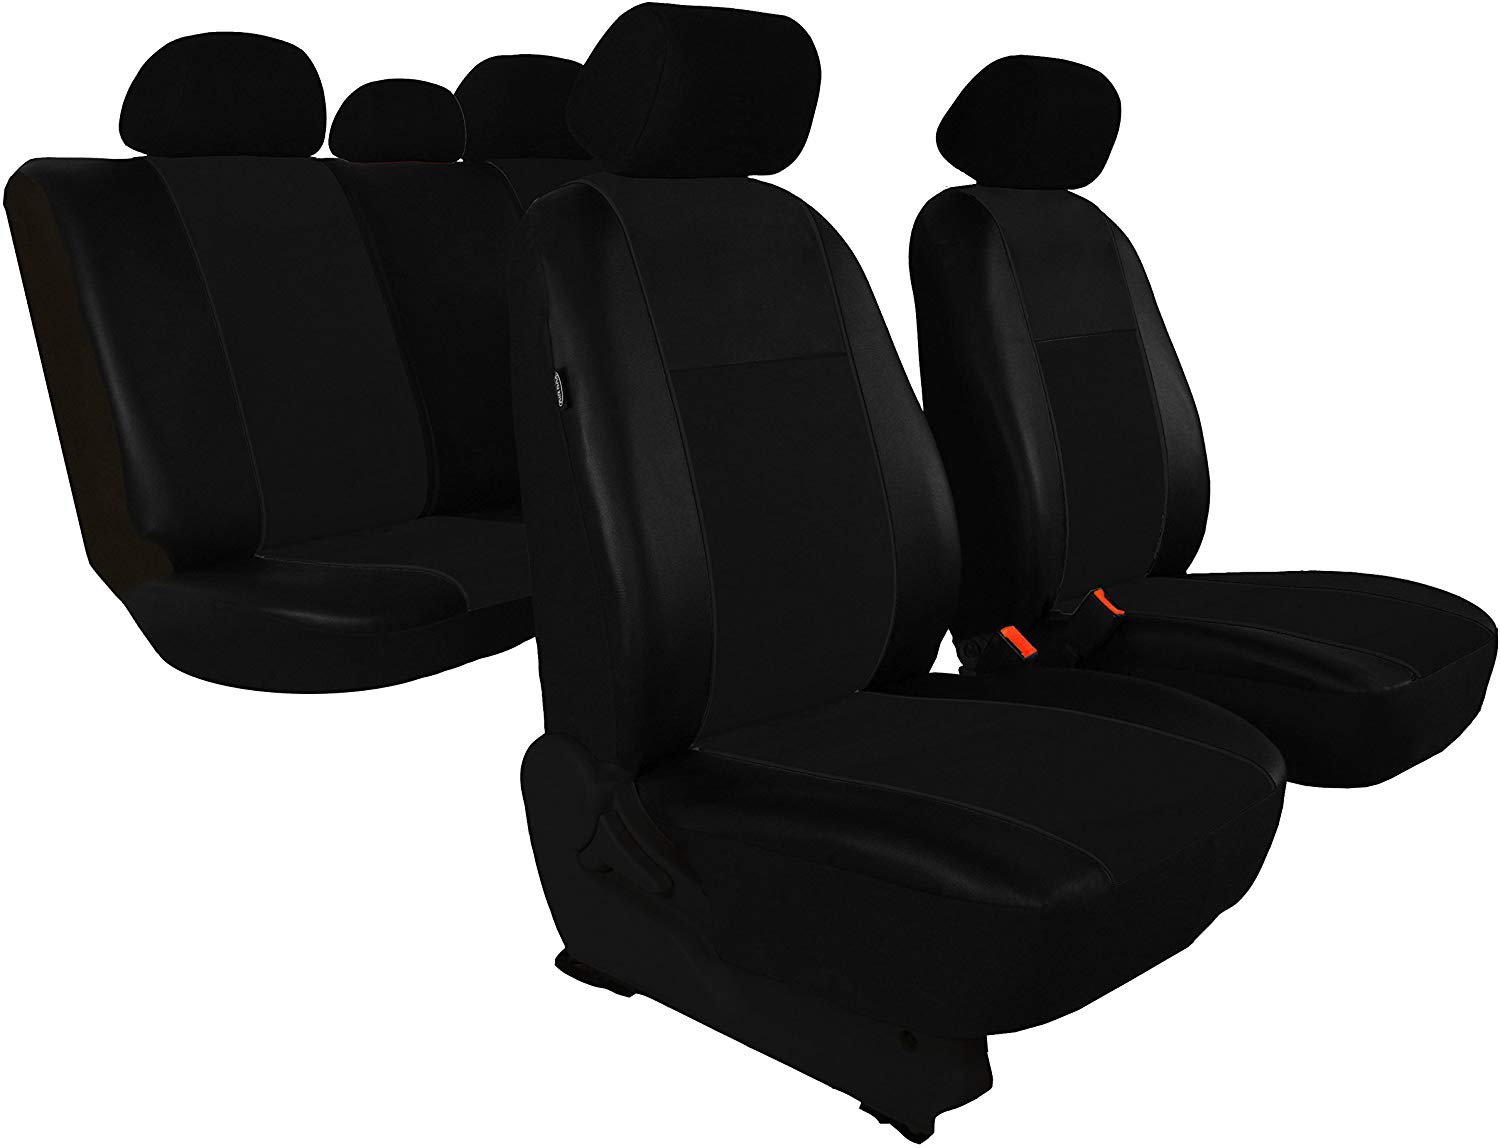 \'Black Design Seat Covers for Ford Mondeo MK5 in this great Offer Unico (Other Offers Available in 7 Colours)